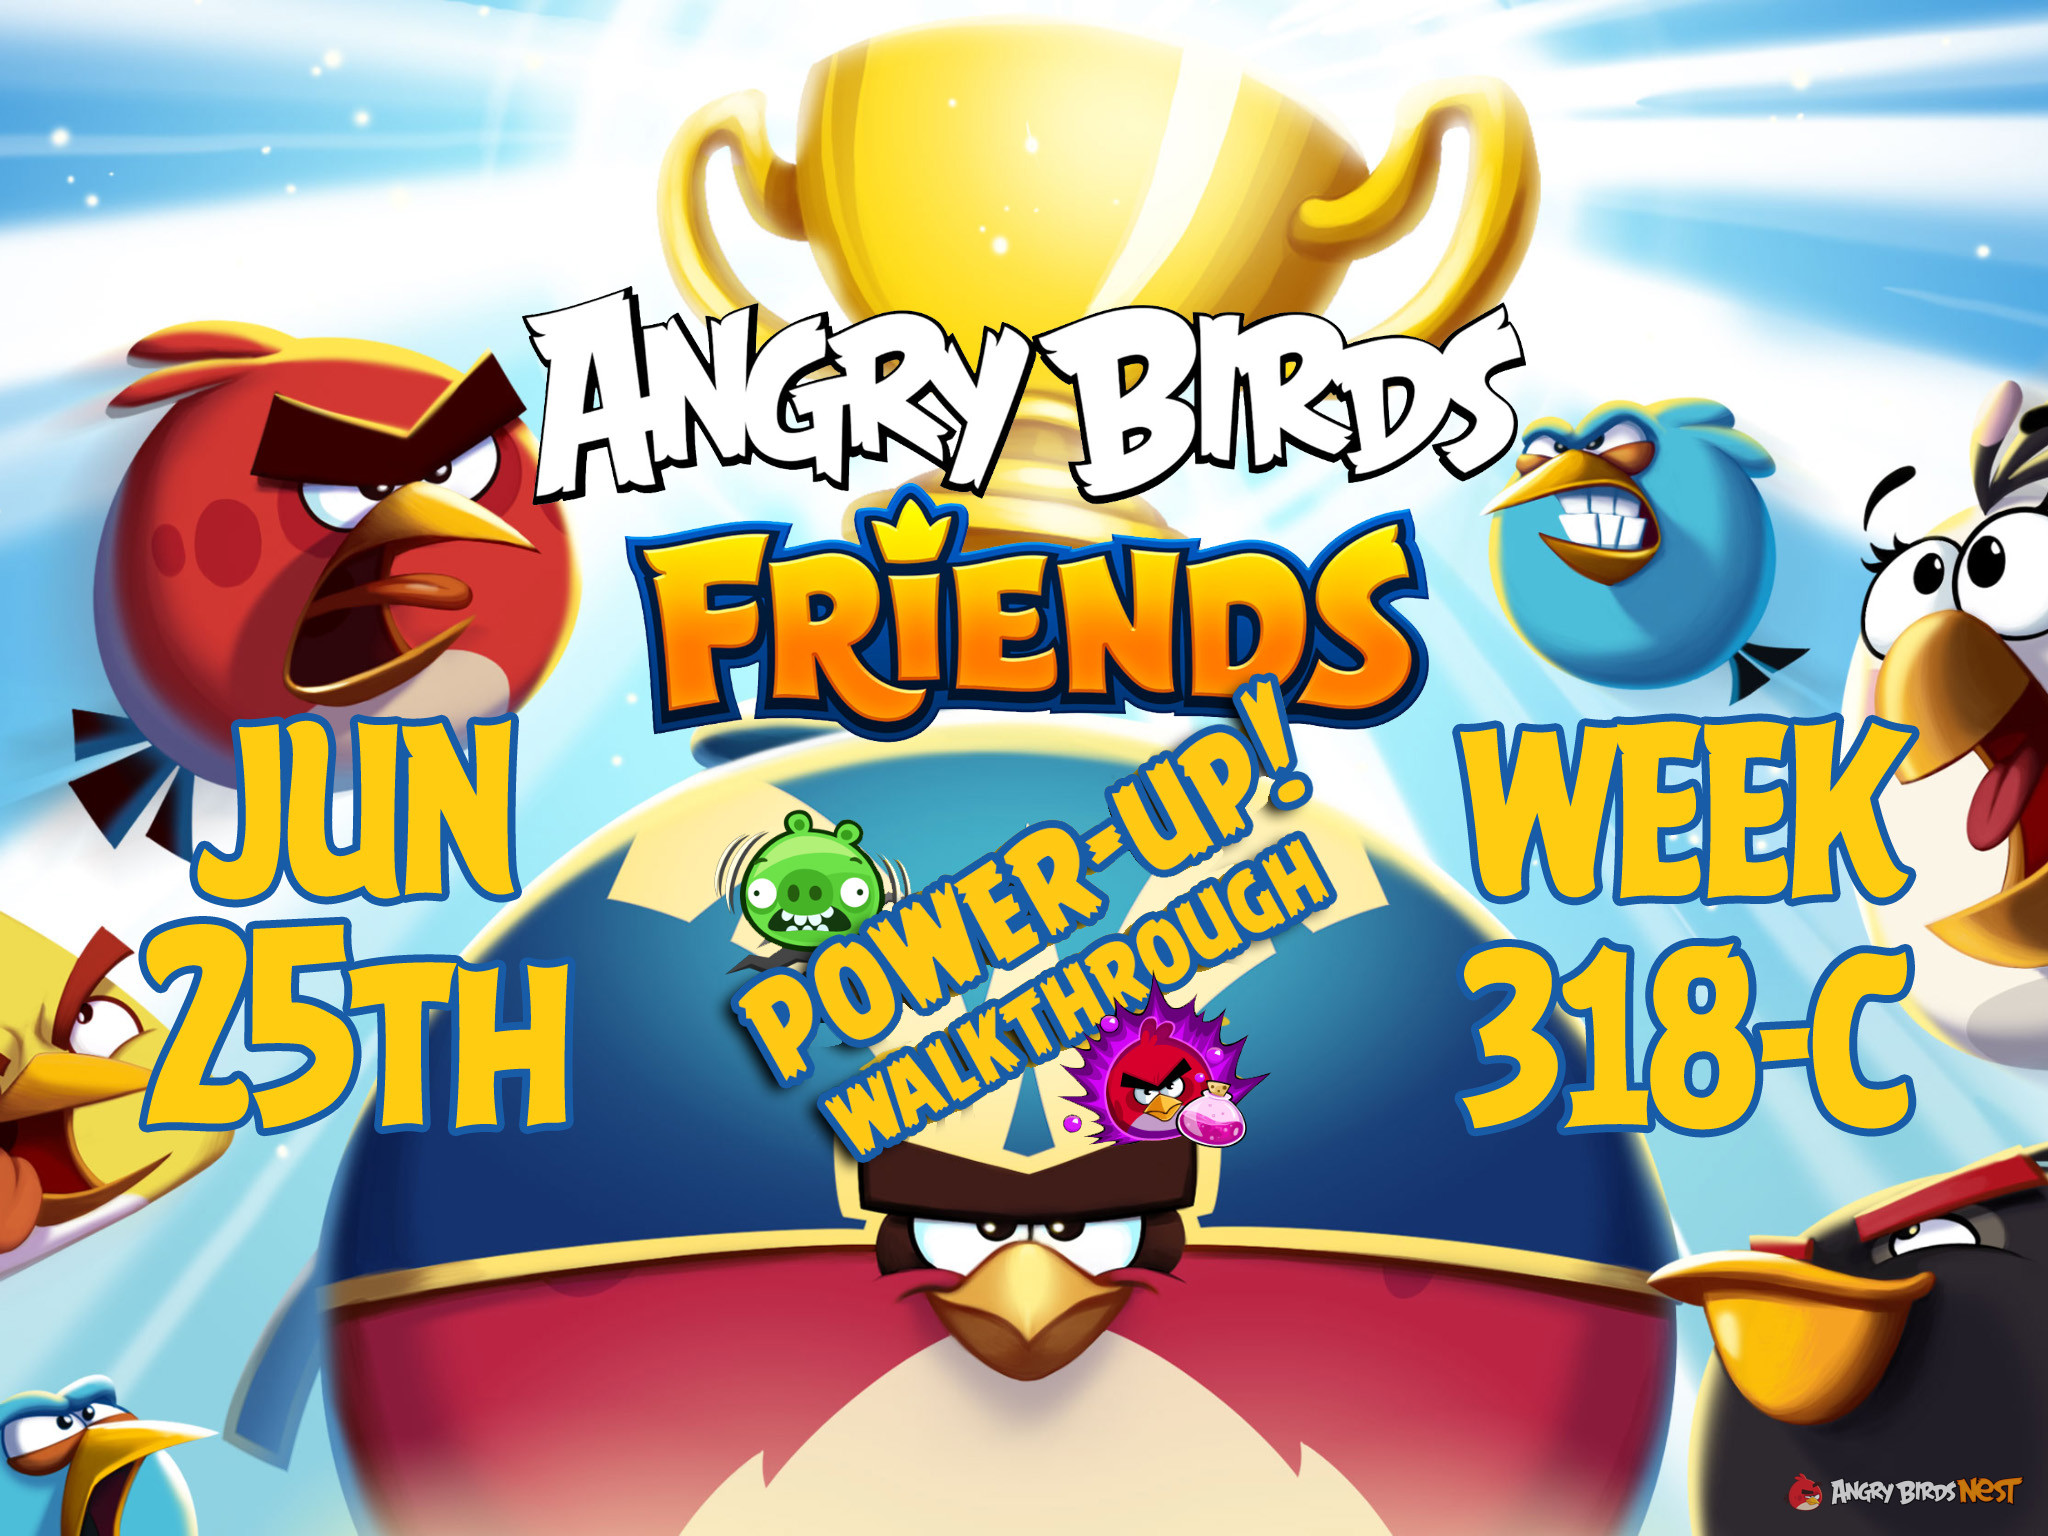 Angry-Birds-Friends-Tournament-Week-318-C-Feature-Image-PU